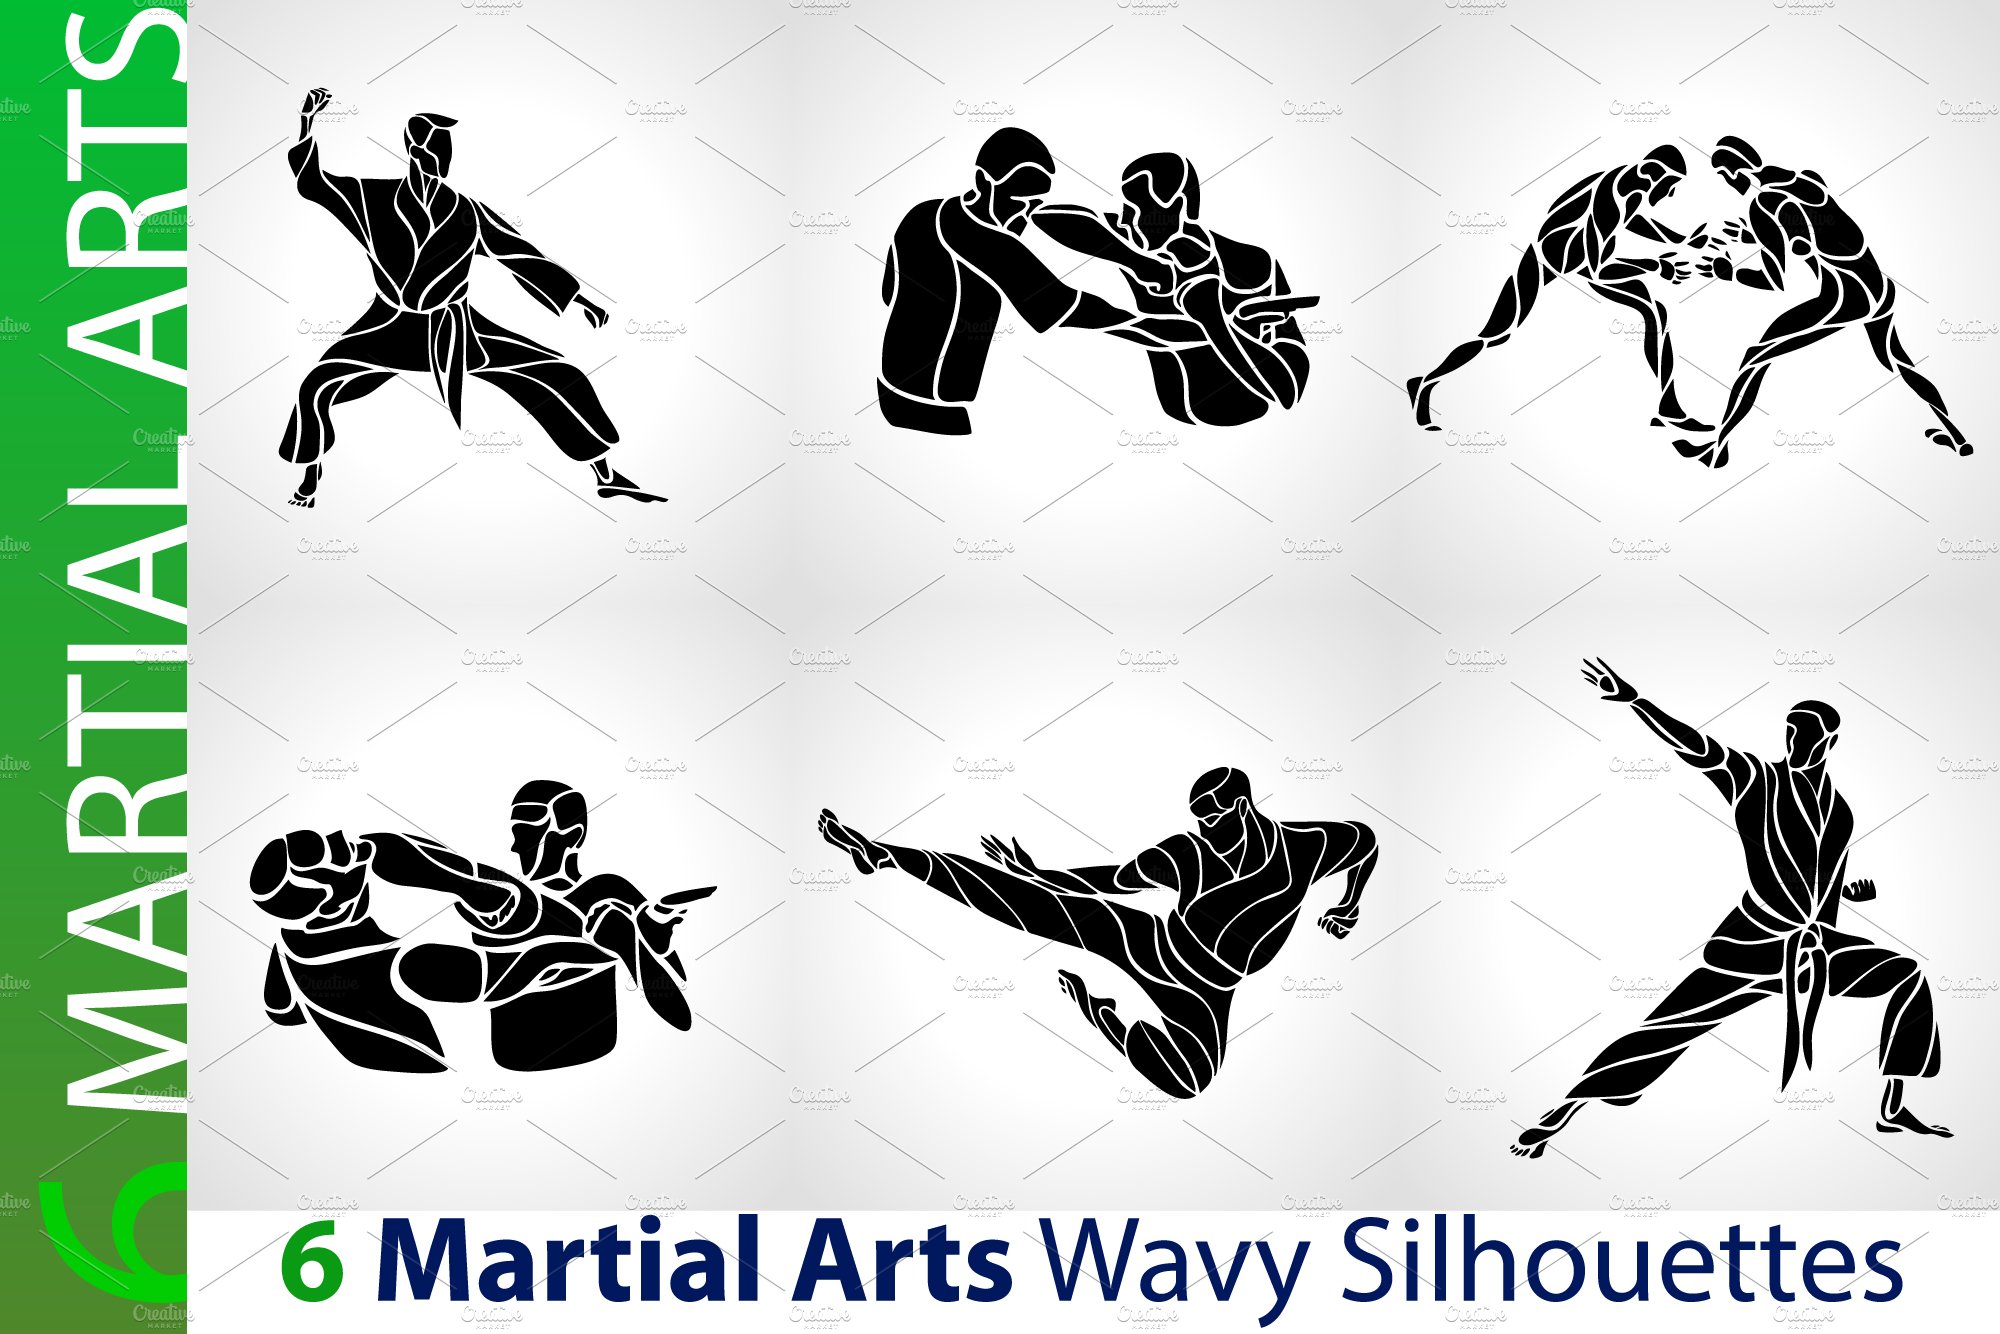 Martial Arts Karate MMA Silhouettes cover image.